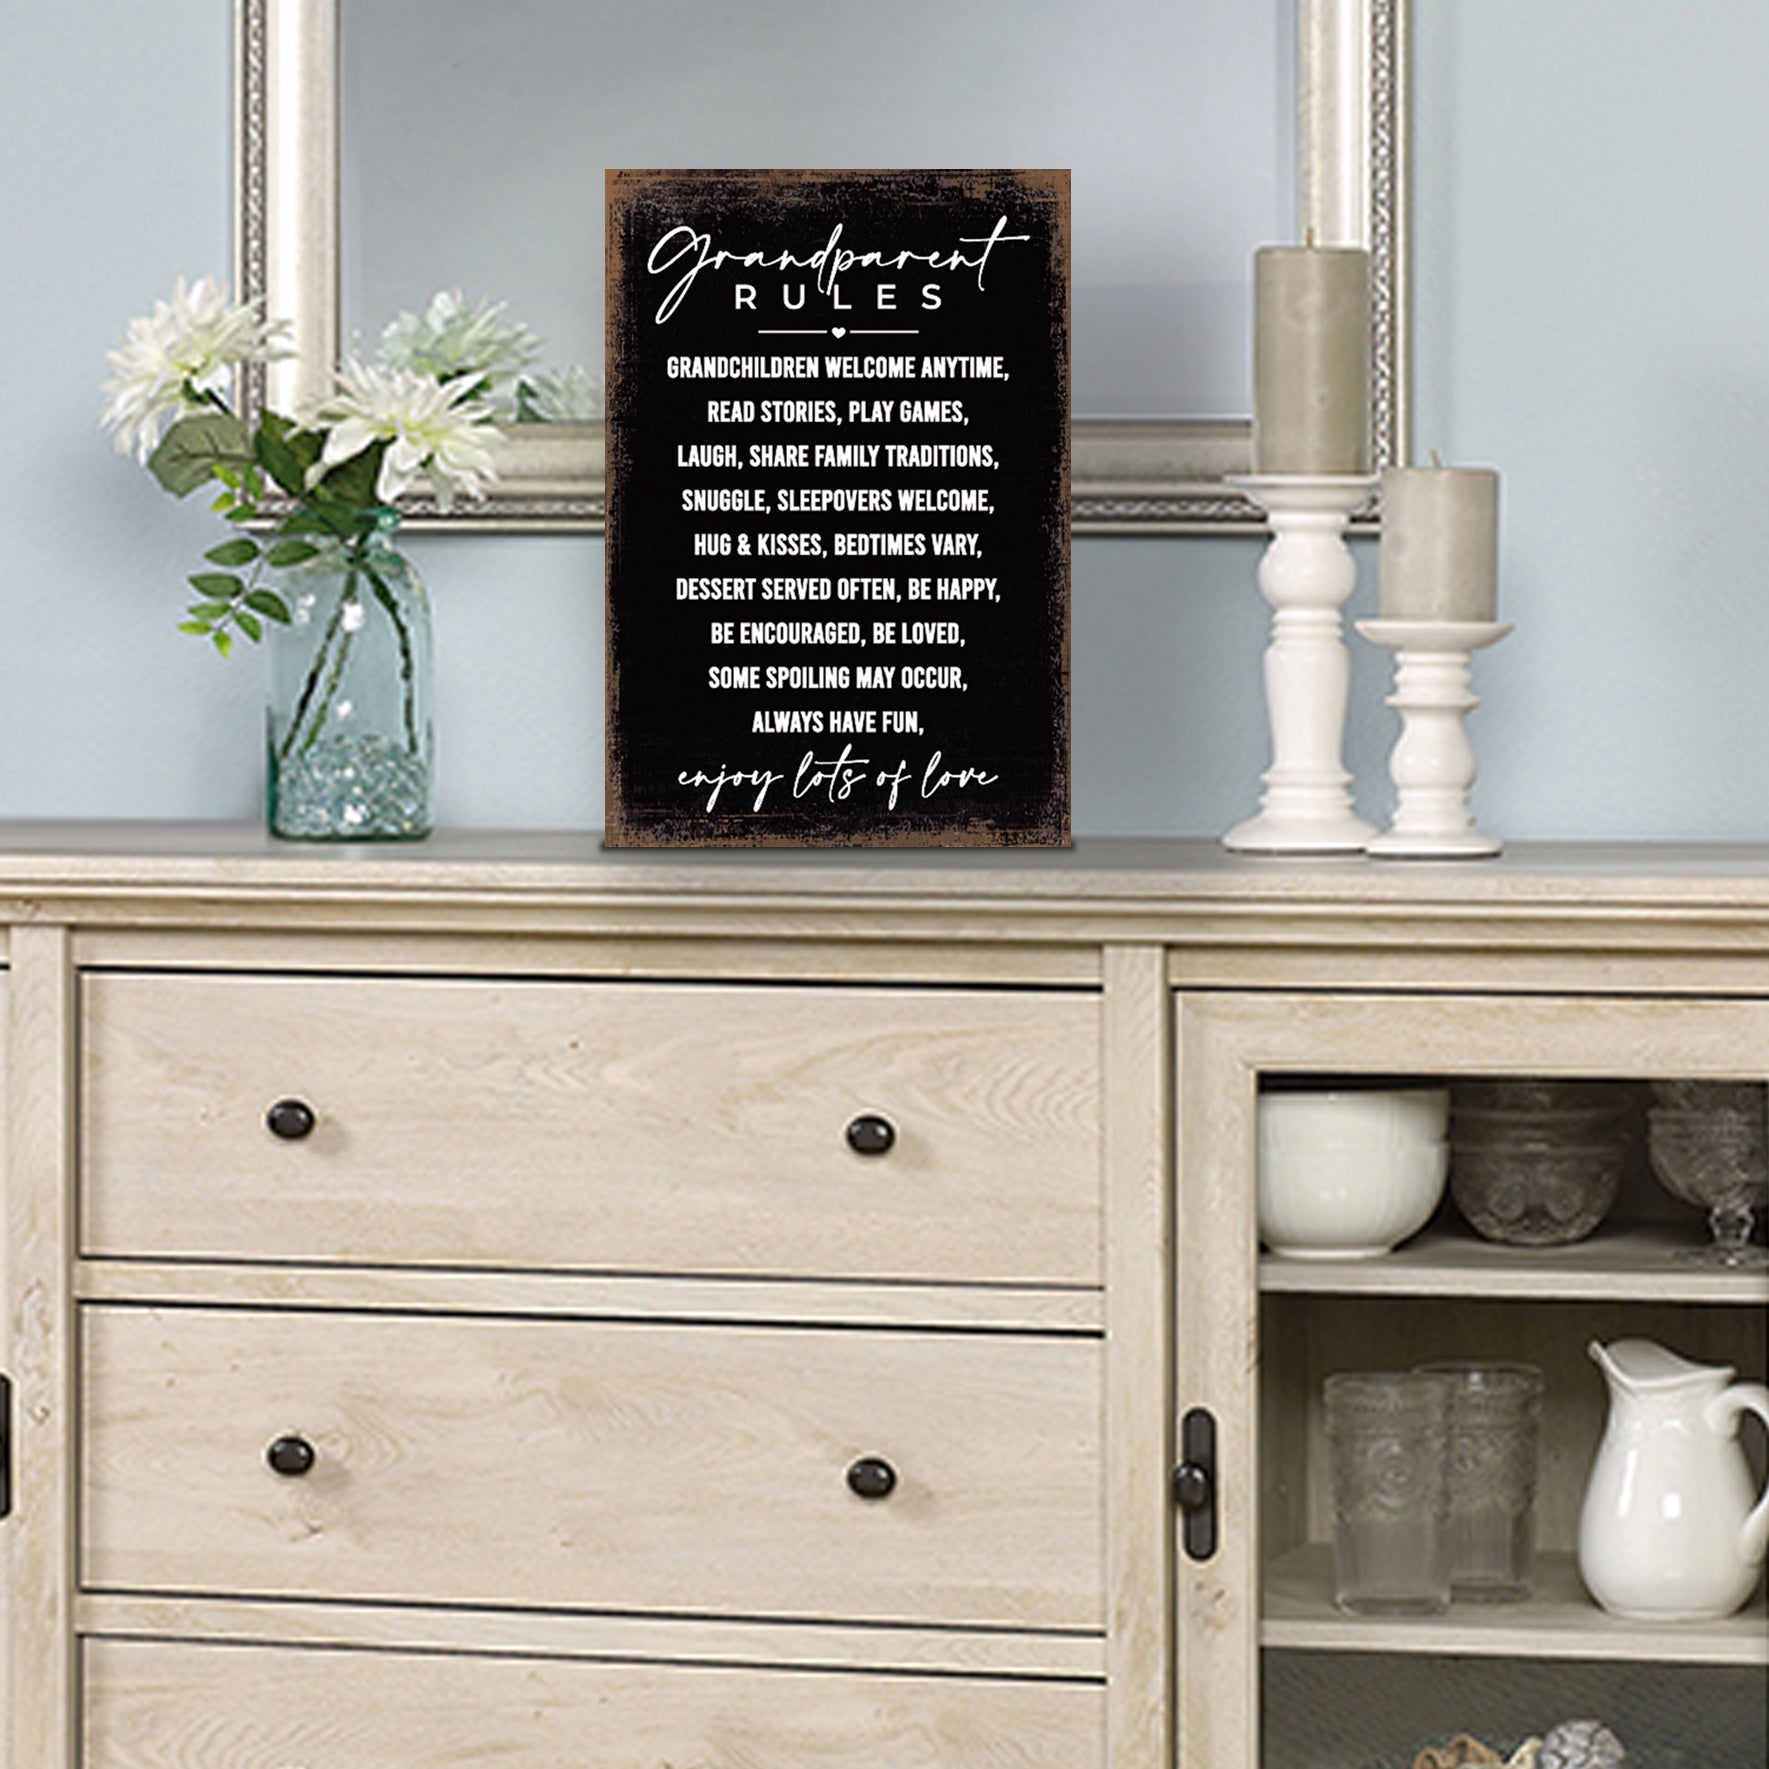 Grandparent Rules Vintage-Inspired Wooden Kitchen Shelf Décor For Housewarming Gift Ideas - LifeSong Milestones